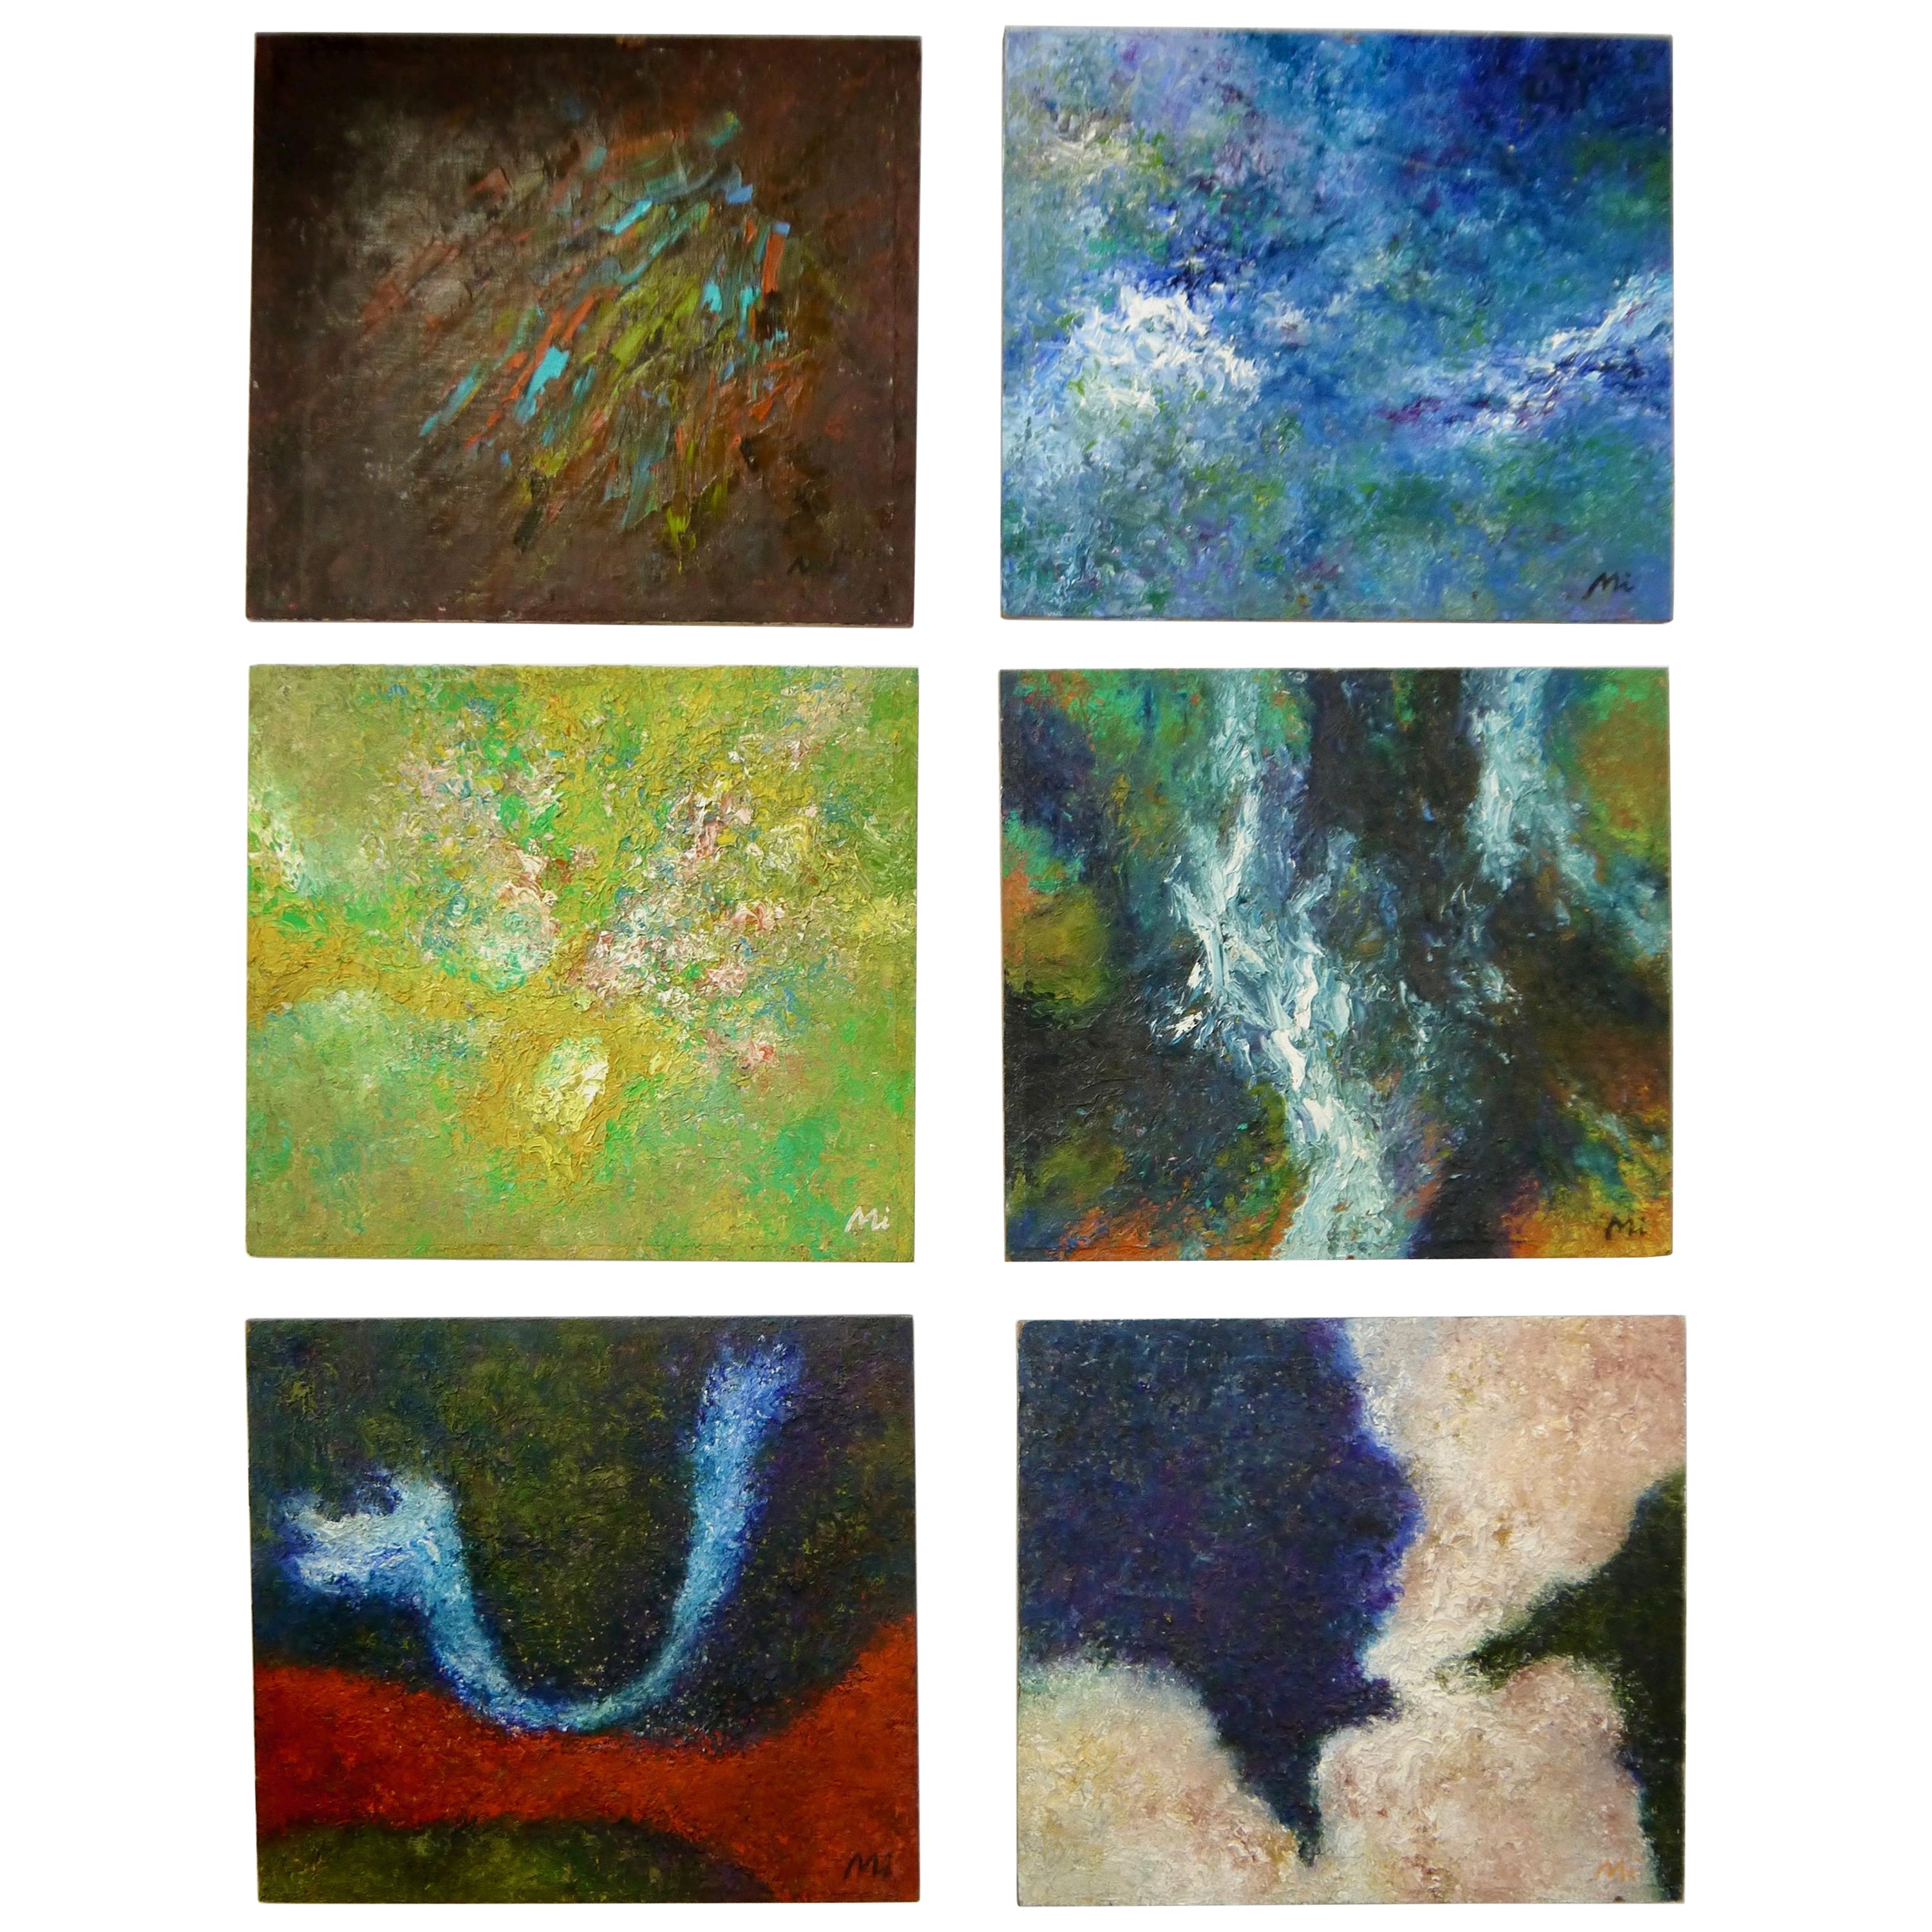 Set of 6 Textured Abstract Oil Paintings, signature: "Mi", 1992